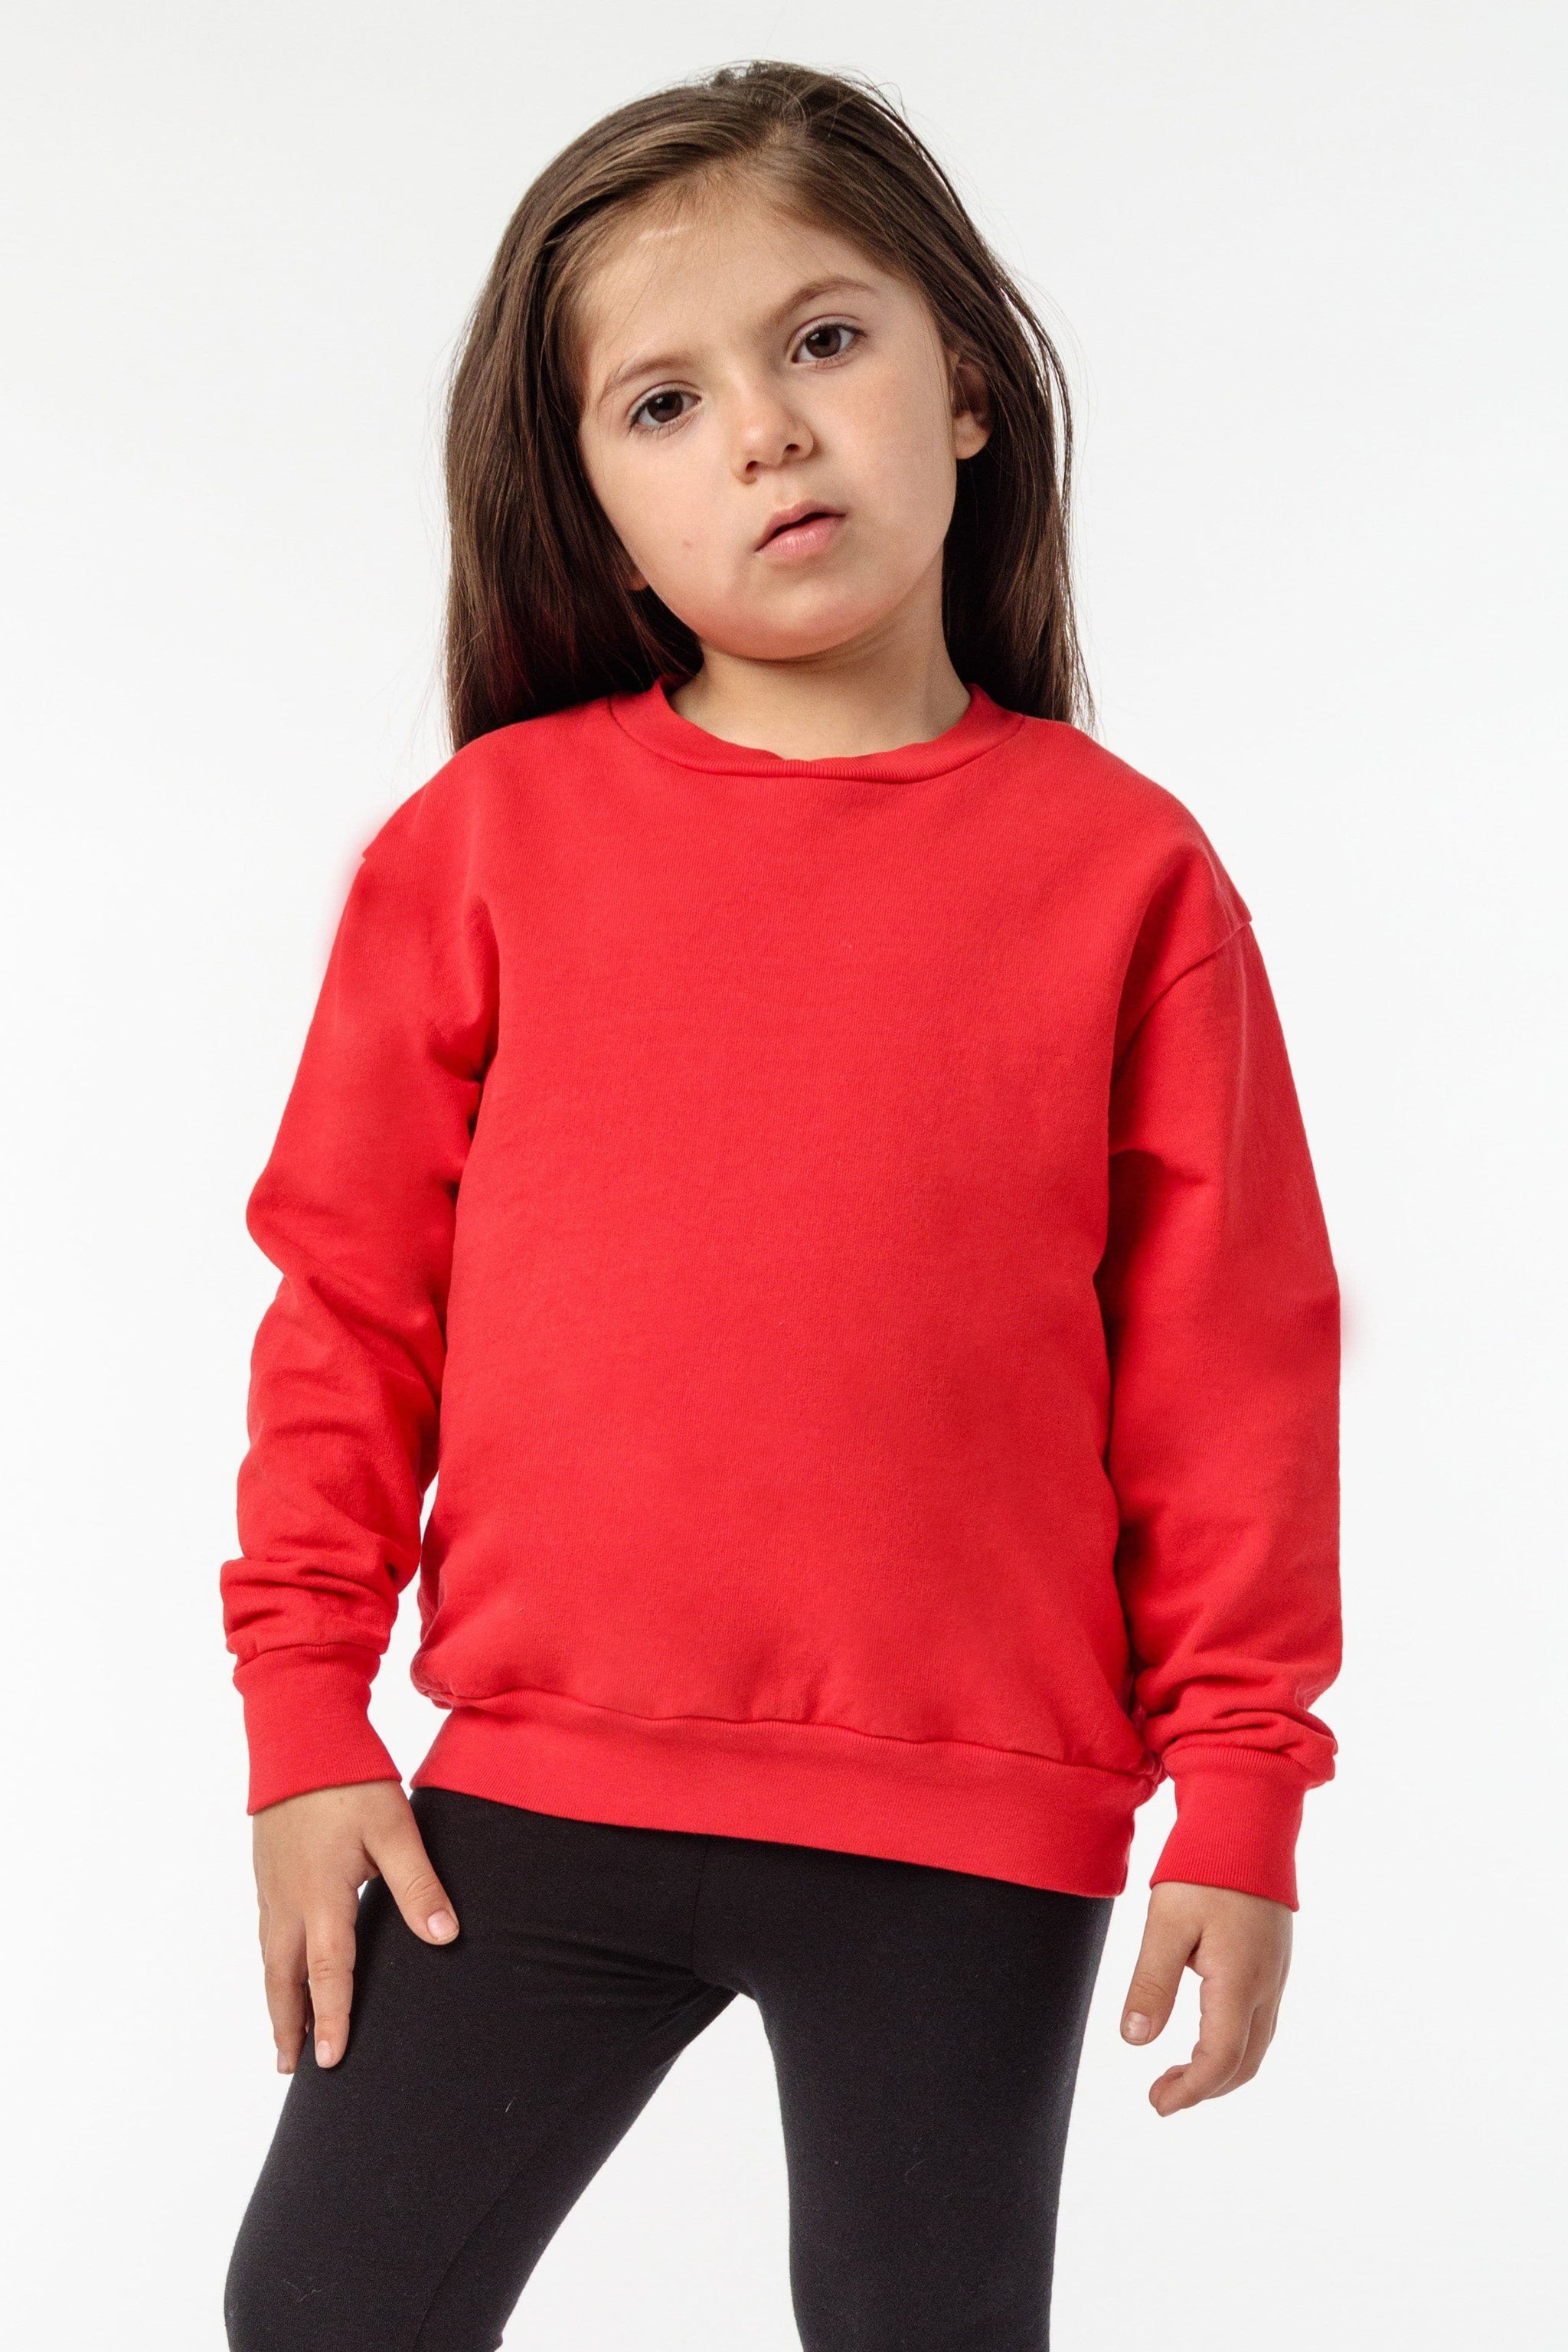 MWT107GD - Toddler Mid-Weight Pullover – Los Angeles Apparel